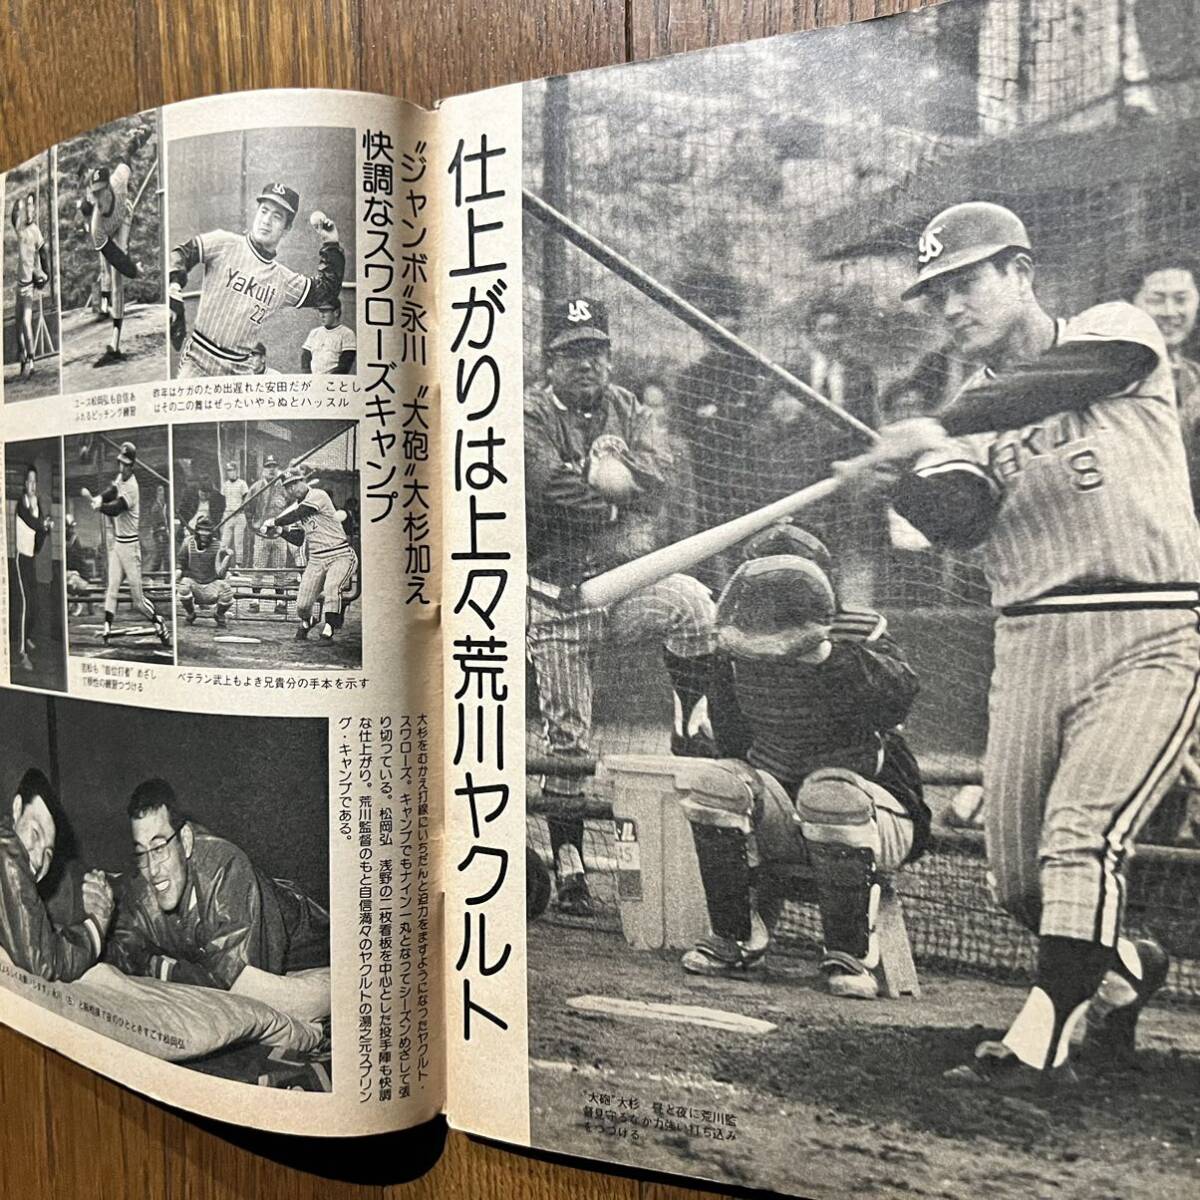  weekly Baseball Showa era 50 year 3 month 3 day number [ photograph name . not equipped ]. person : length . direction.. hill regular two *. sudden : Yamaguchi height .* roots Hiroshima *. river Yakult :. river britain .* other 